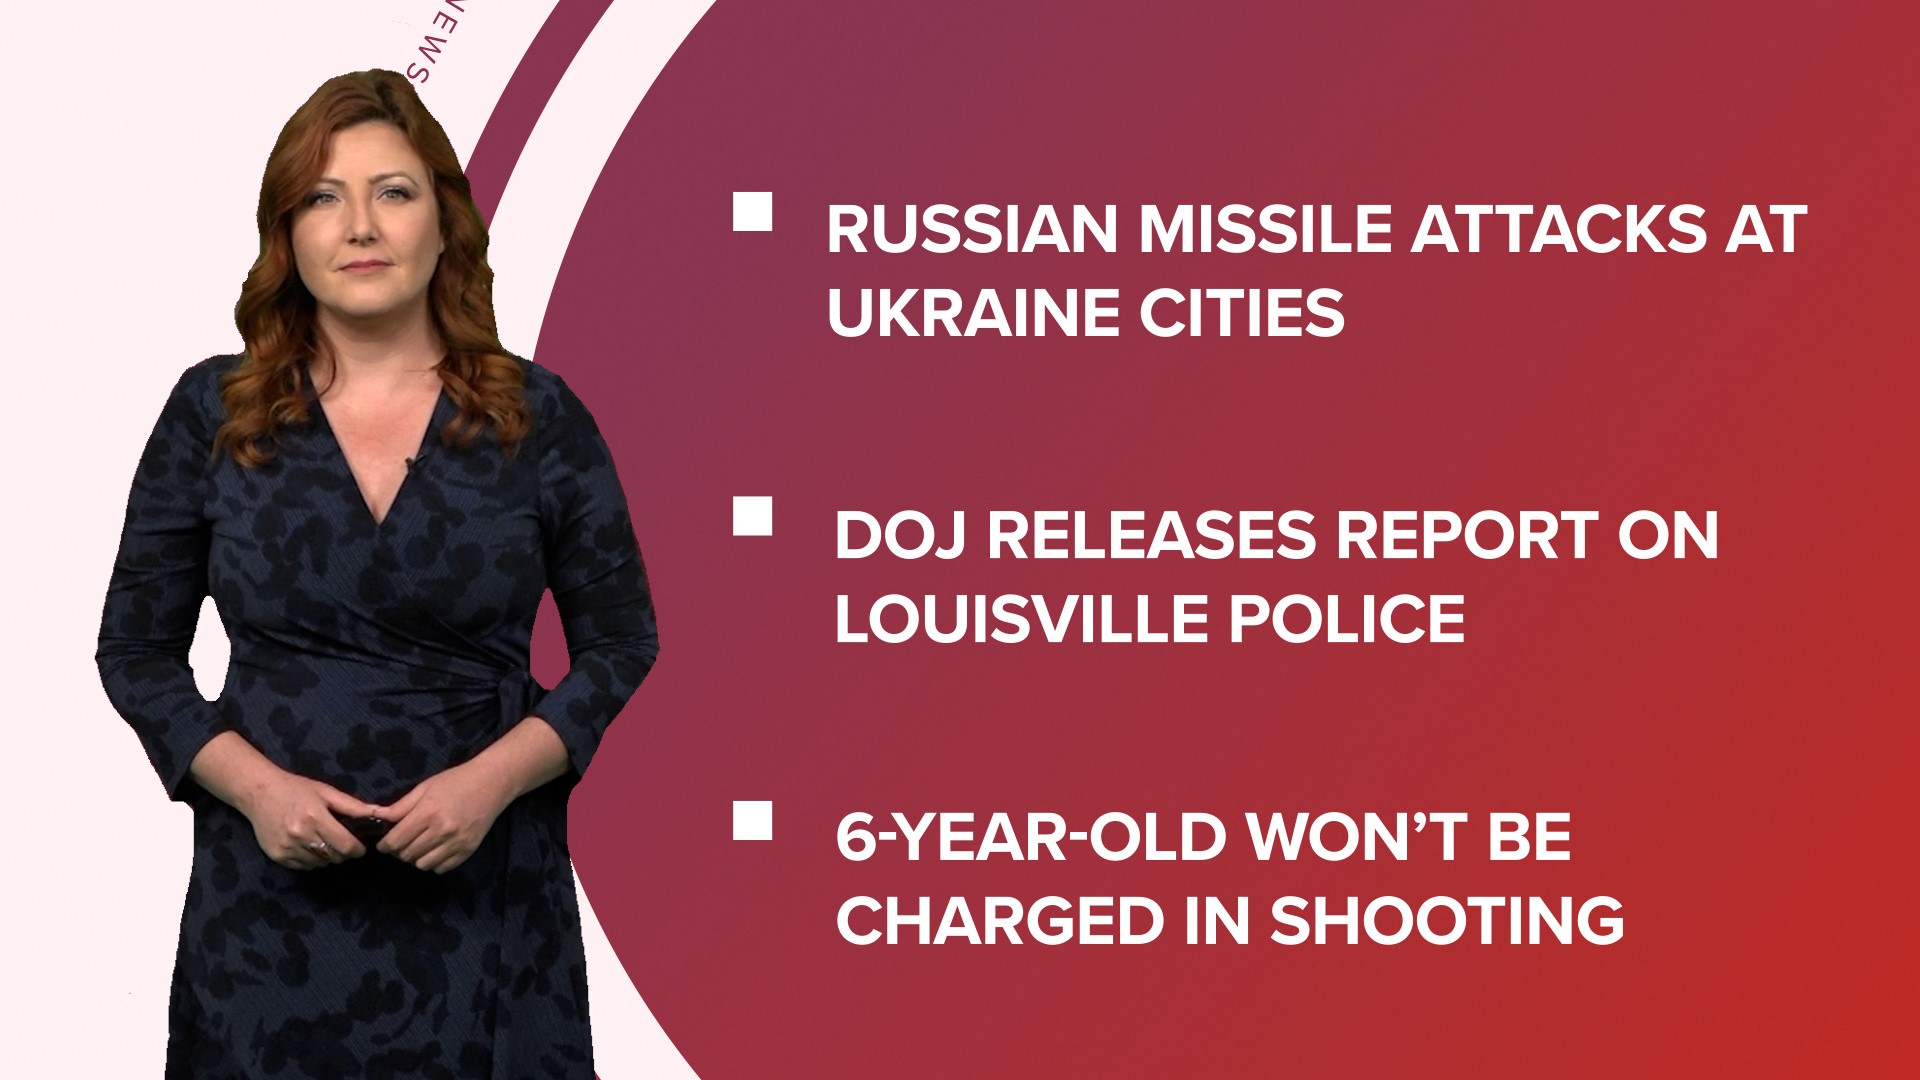 A look at what is happening in the news from a Russian missile attack on Ukraine to the DOJ releasing report on Louisville police and Daylight Saving Time facts.